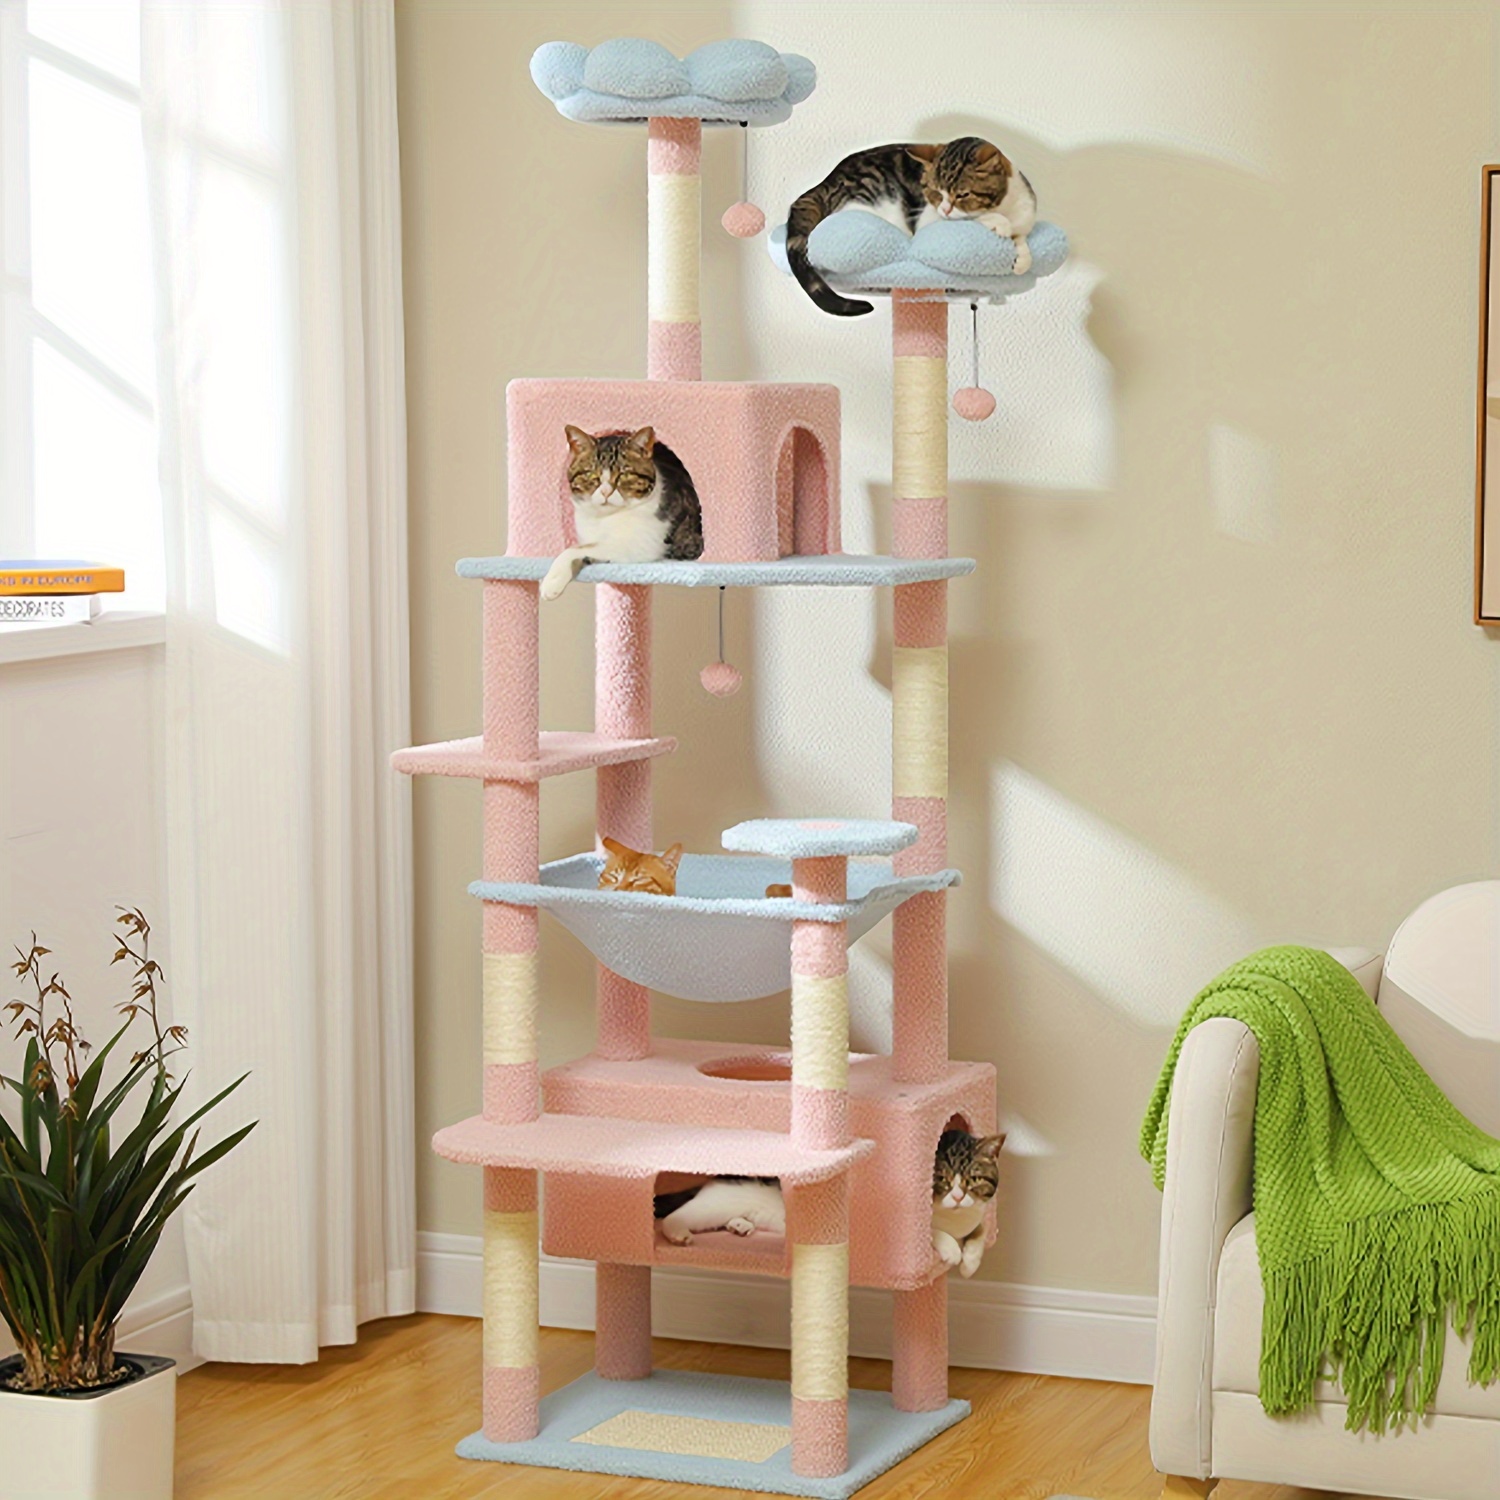 

72 Inches Wooden Cat Tower With Multi-level Cat Tree, Luxury Cat Tower With Condo Hammock, Cat Scrapers With Scratching Post, Cat Accessories, Cat Toy, Kittens House